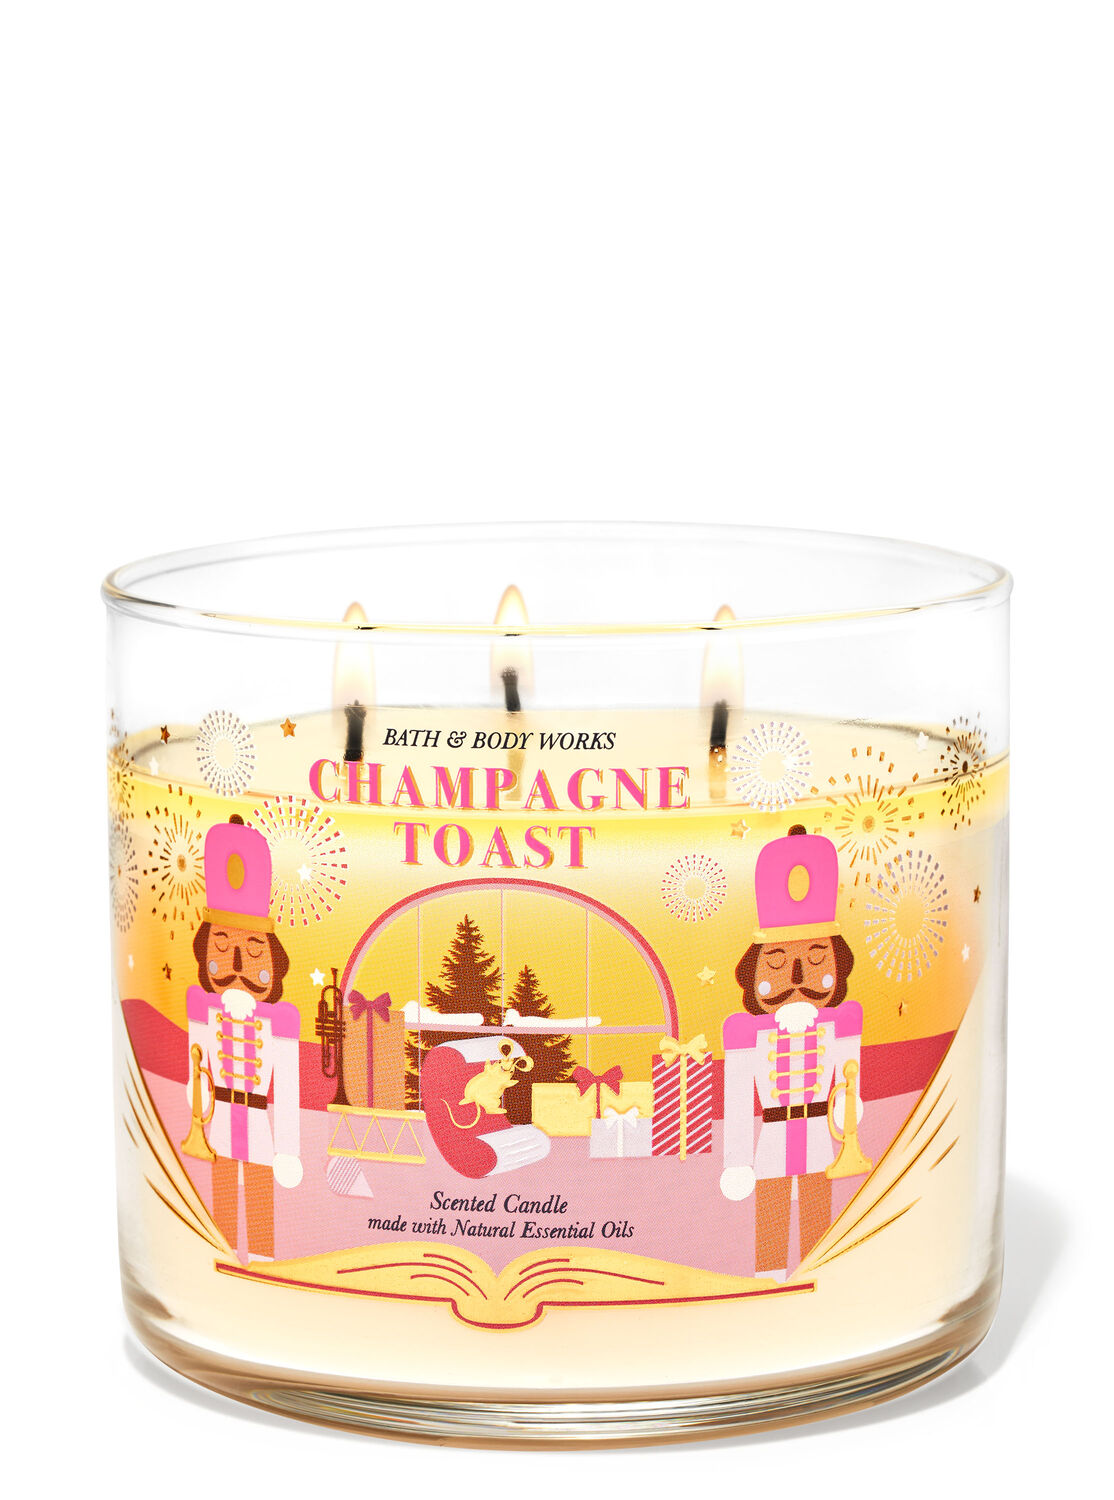 Bath & Body Works Accents | Bath and Body Works Champagne Toast 3-Wick Candle | Color: Pink/White | Size: Os | Megan1393's Closet